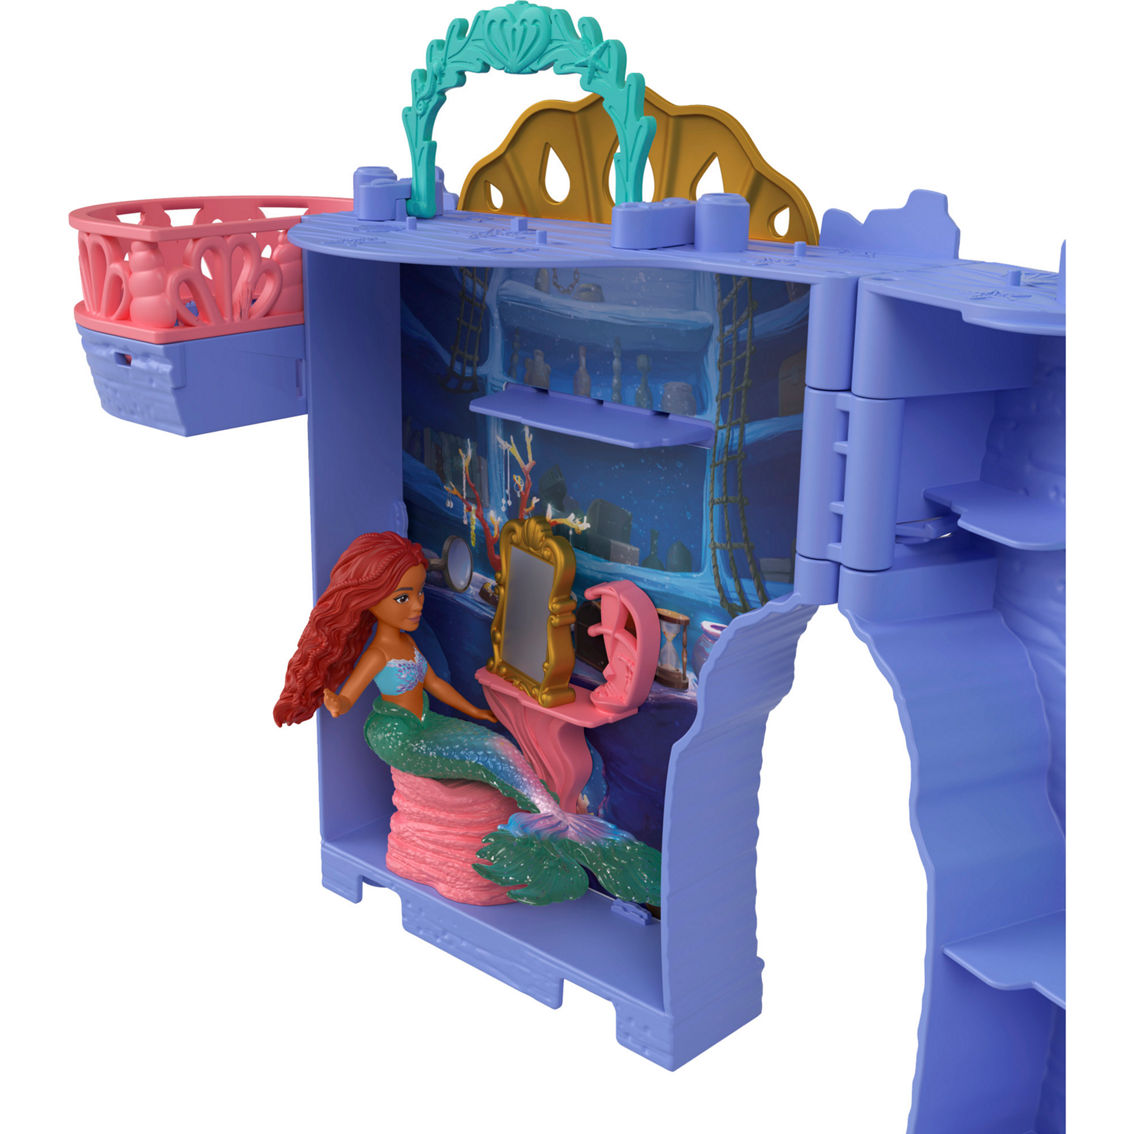 Disney Storytime Stackers The Little Mermaid Ariel's Grotto Small Playset - Image 5 of 10